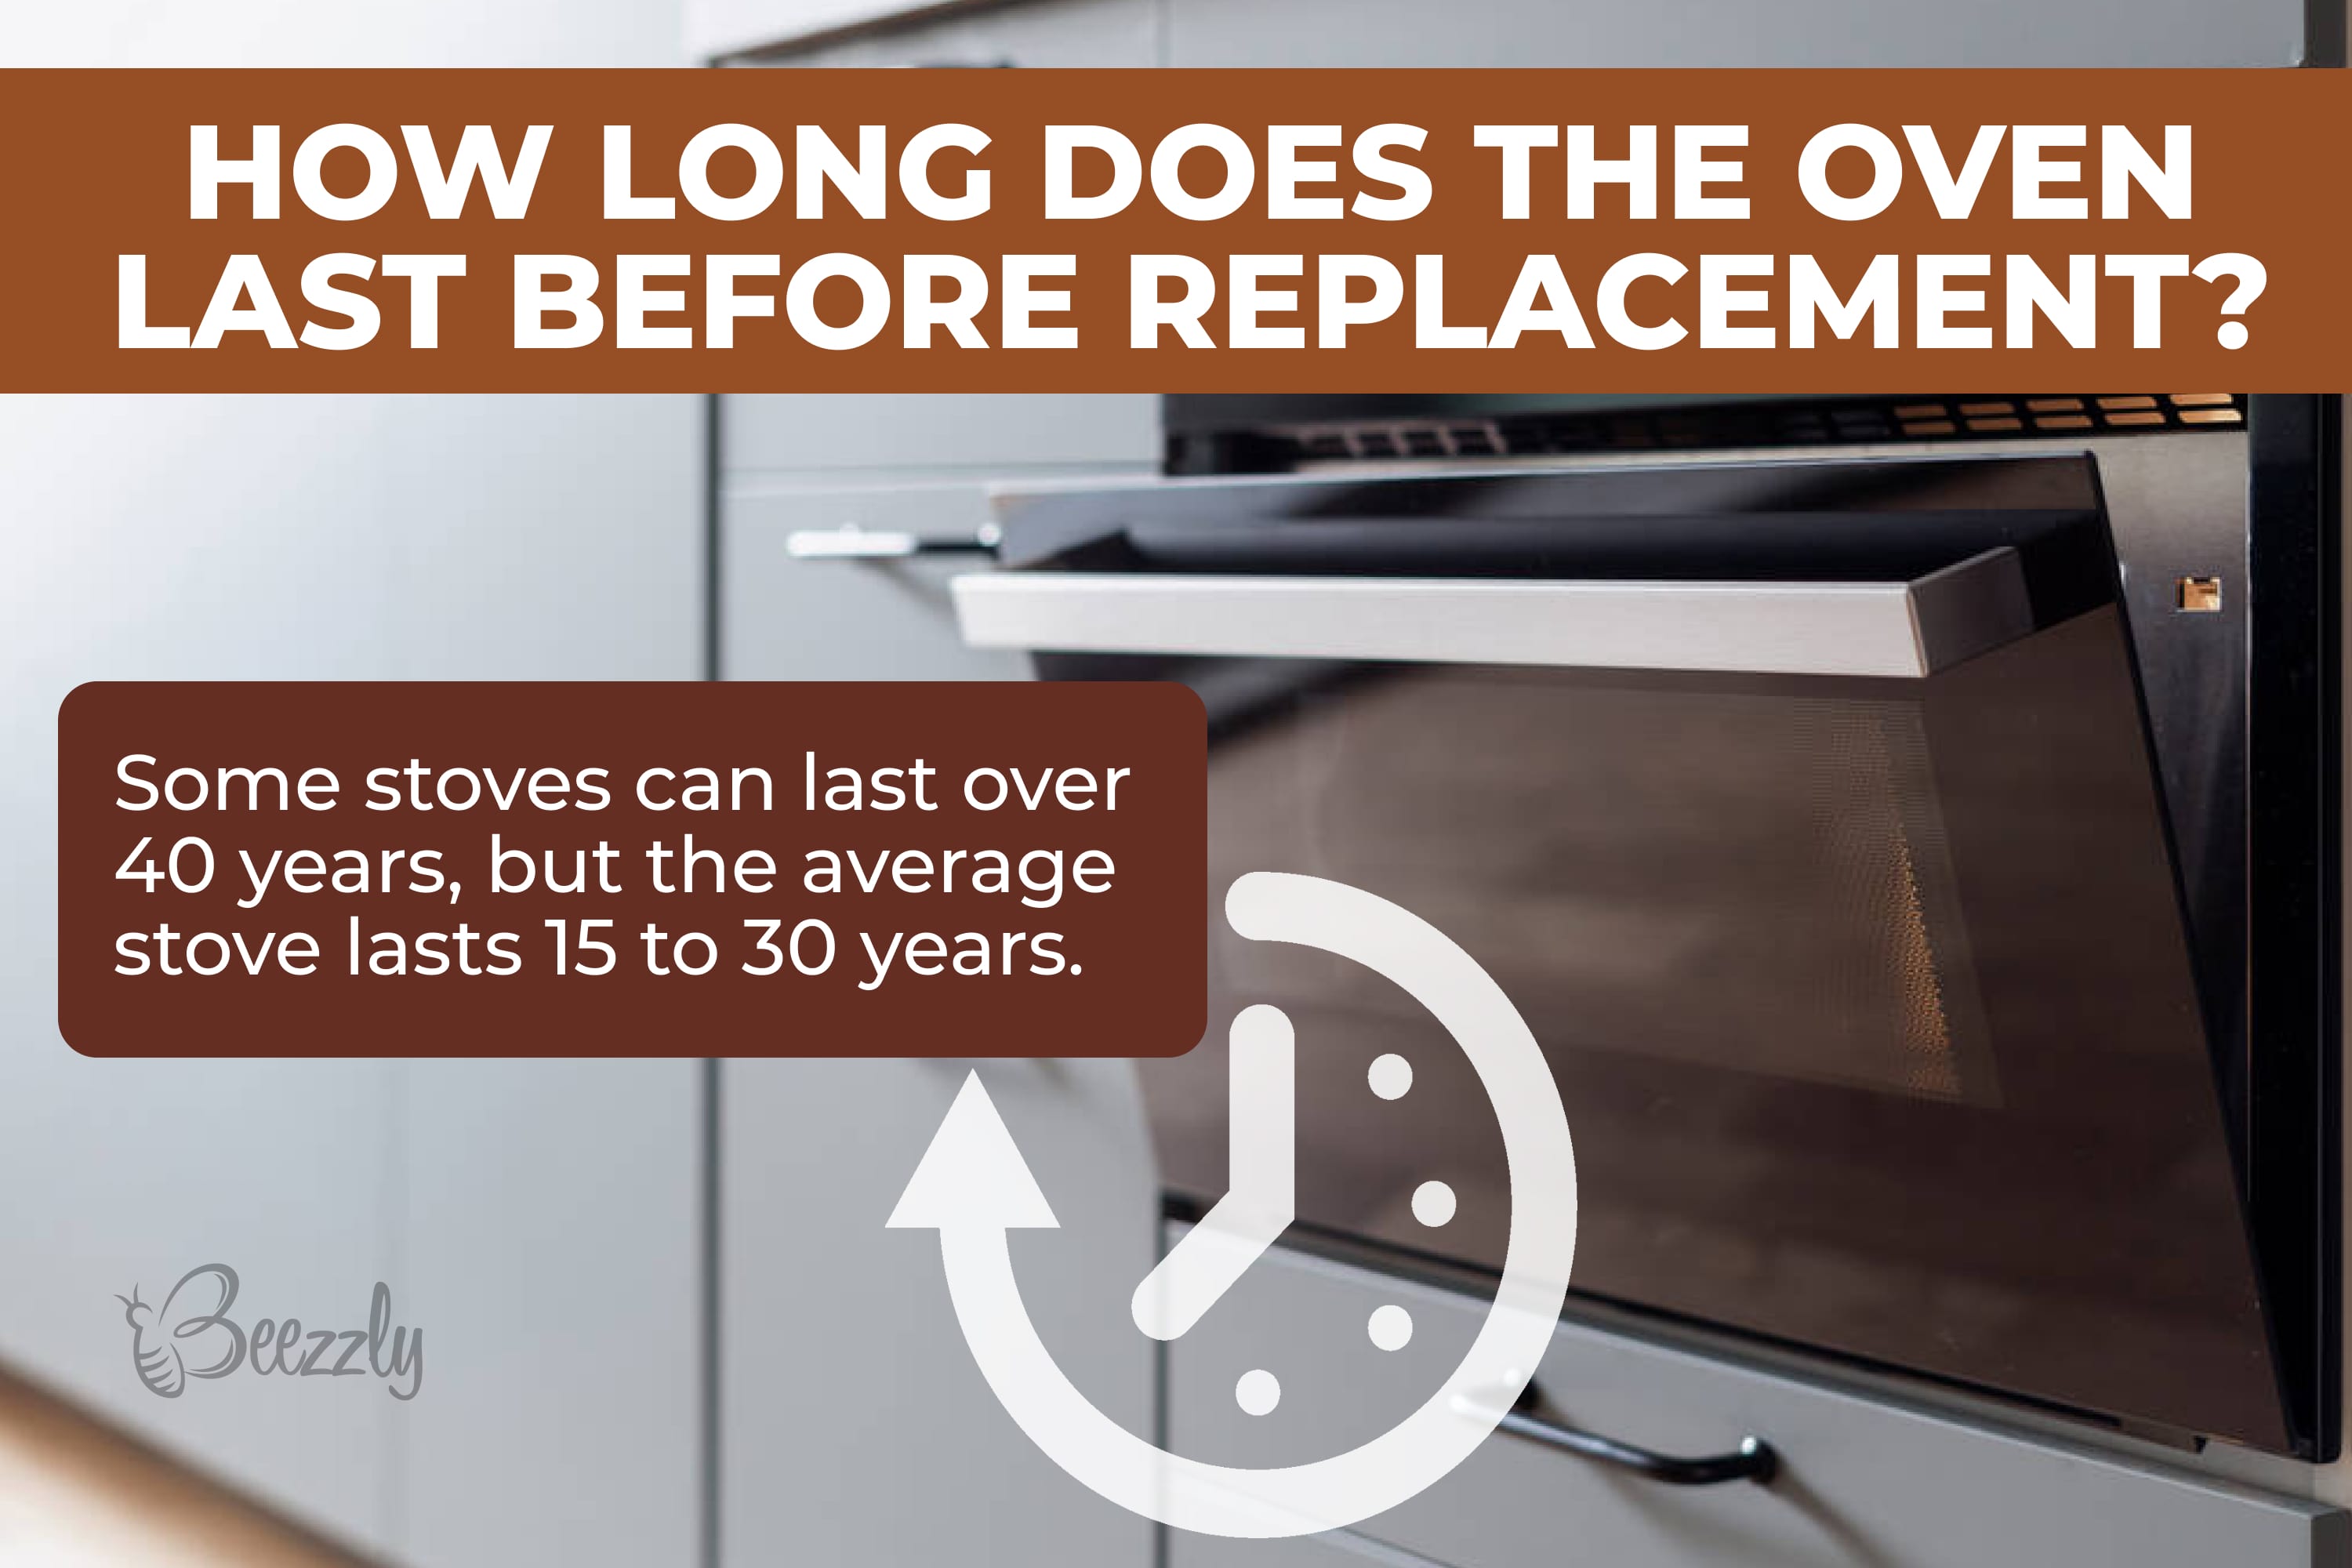 How long does the oven last before replacement